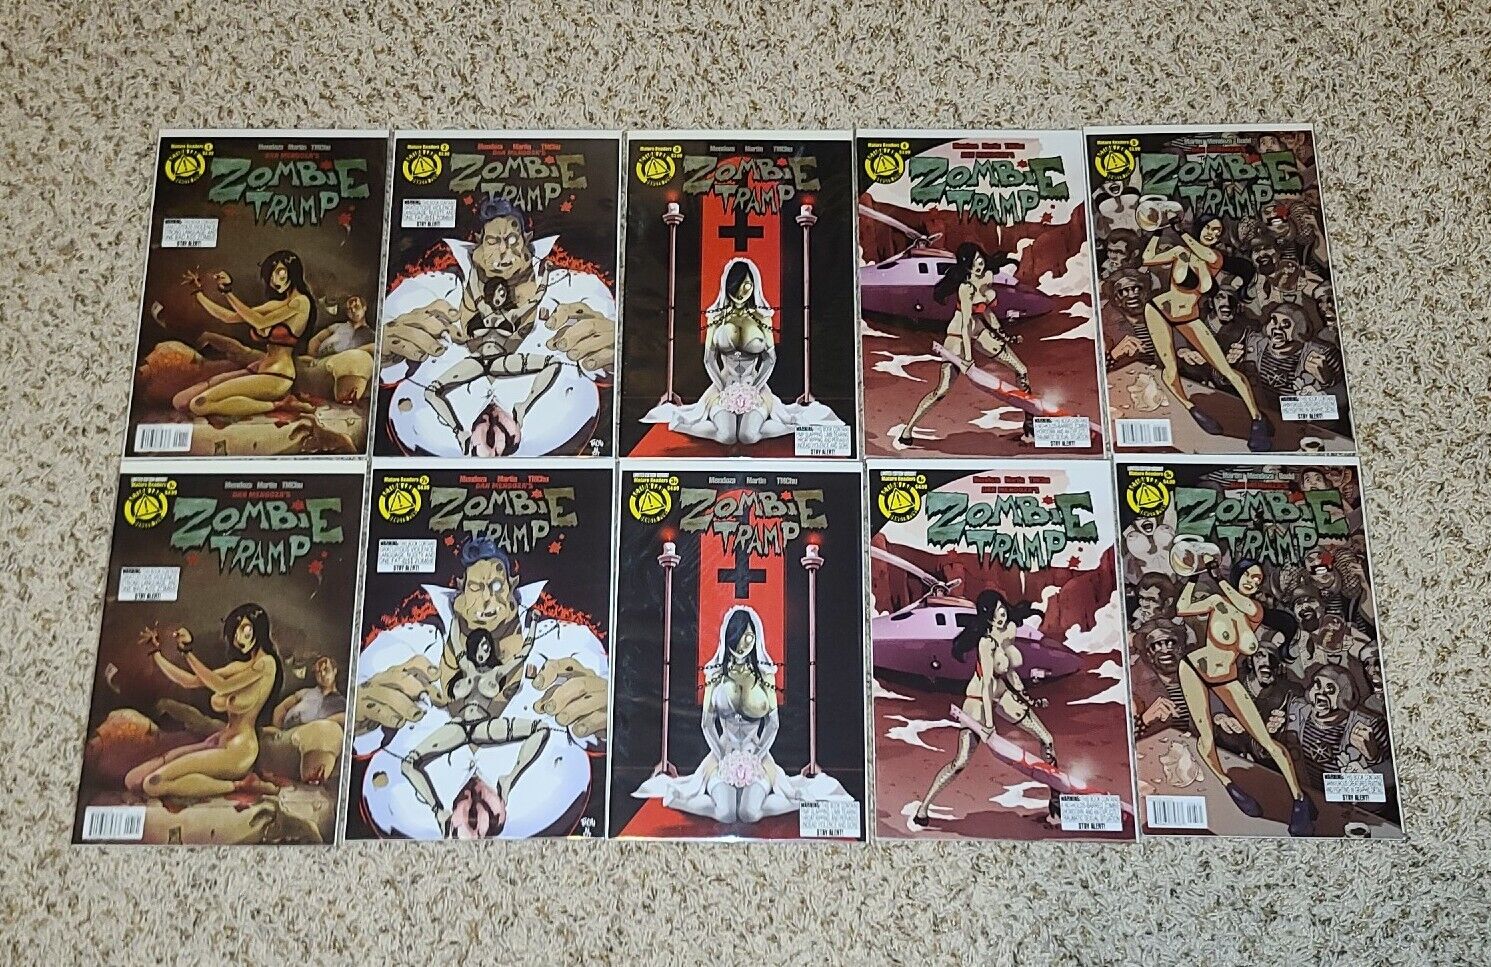 Zombie Tramp Comic Lot - Issues 1, 2, 3 ,4 & 5 - Risque Variants Included